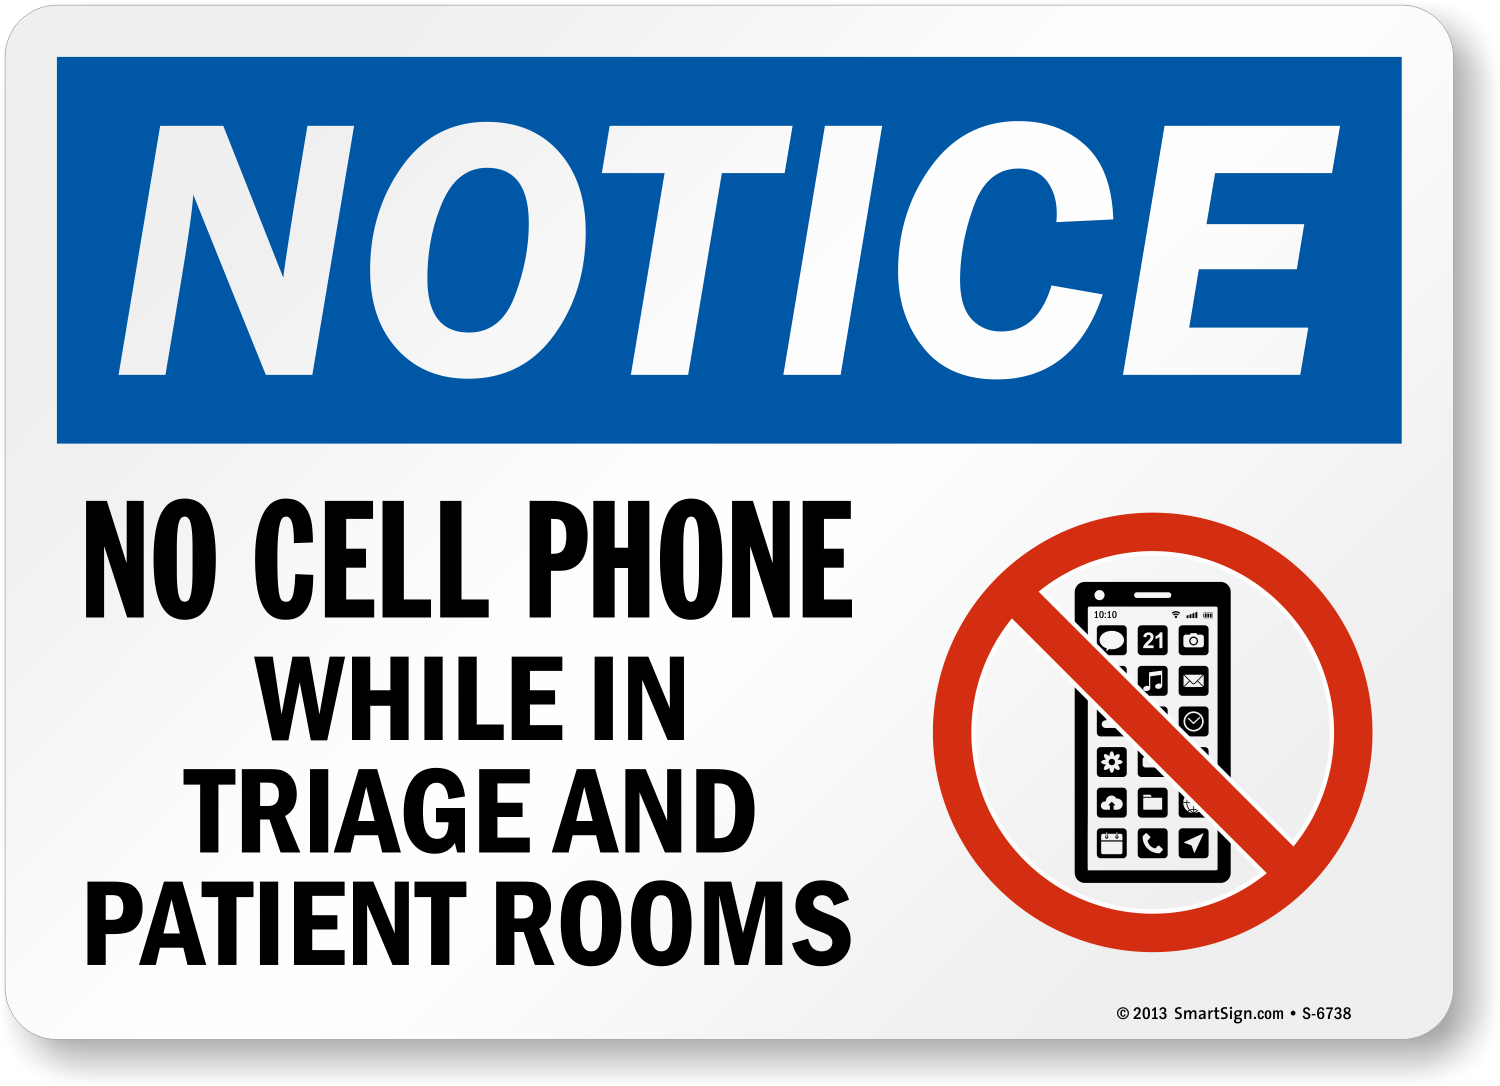 No Cell Phone While In Triage And Patient Rooms Notice Sign, SKU S6738